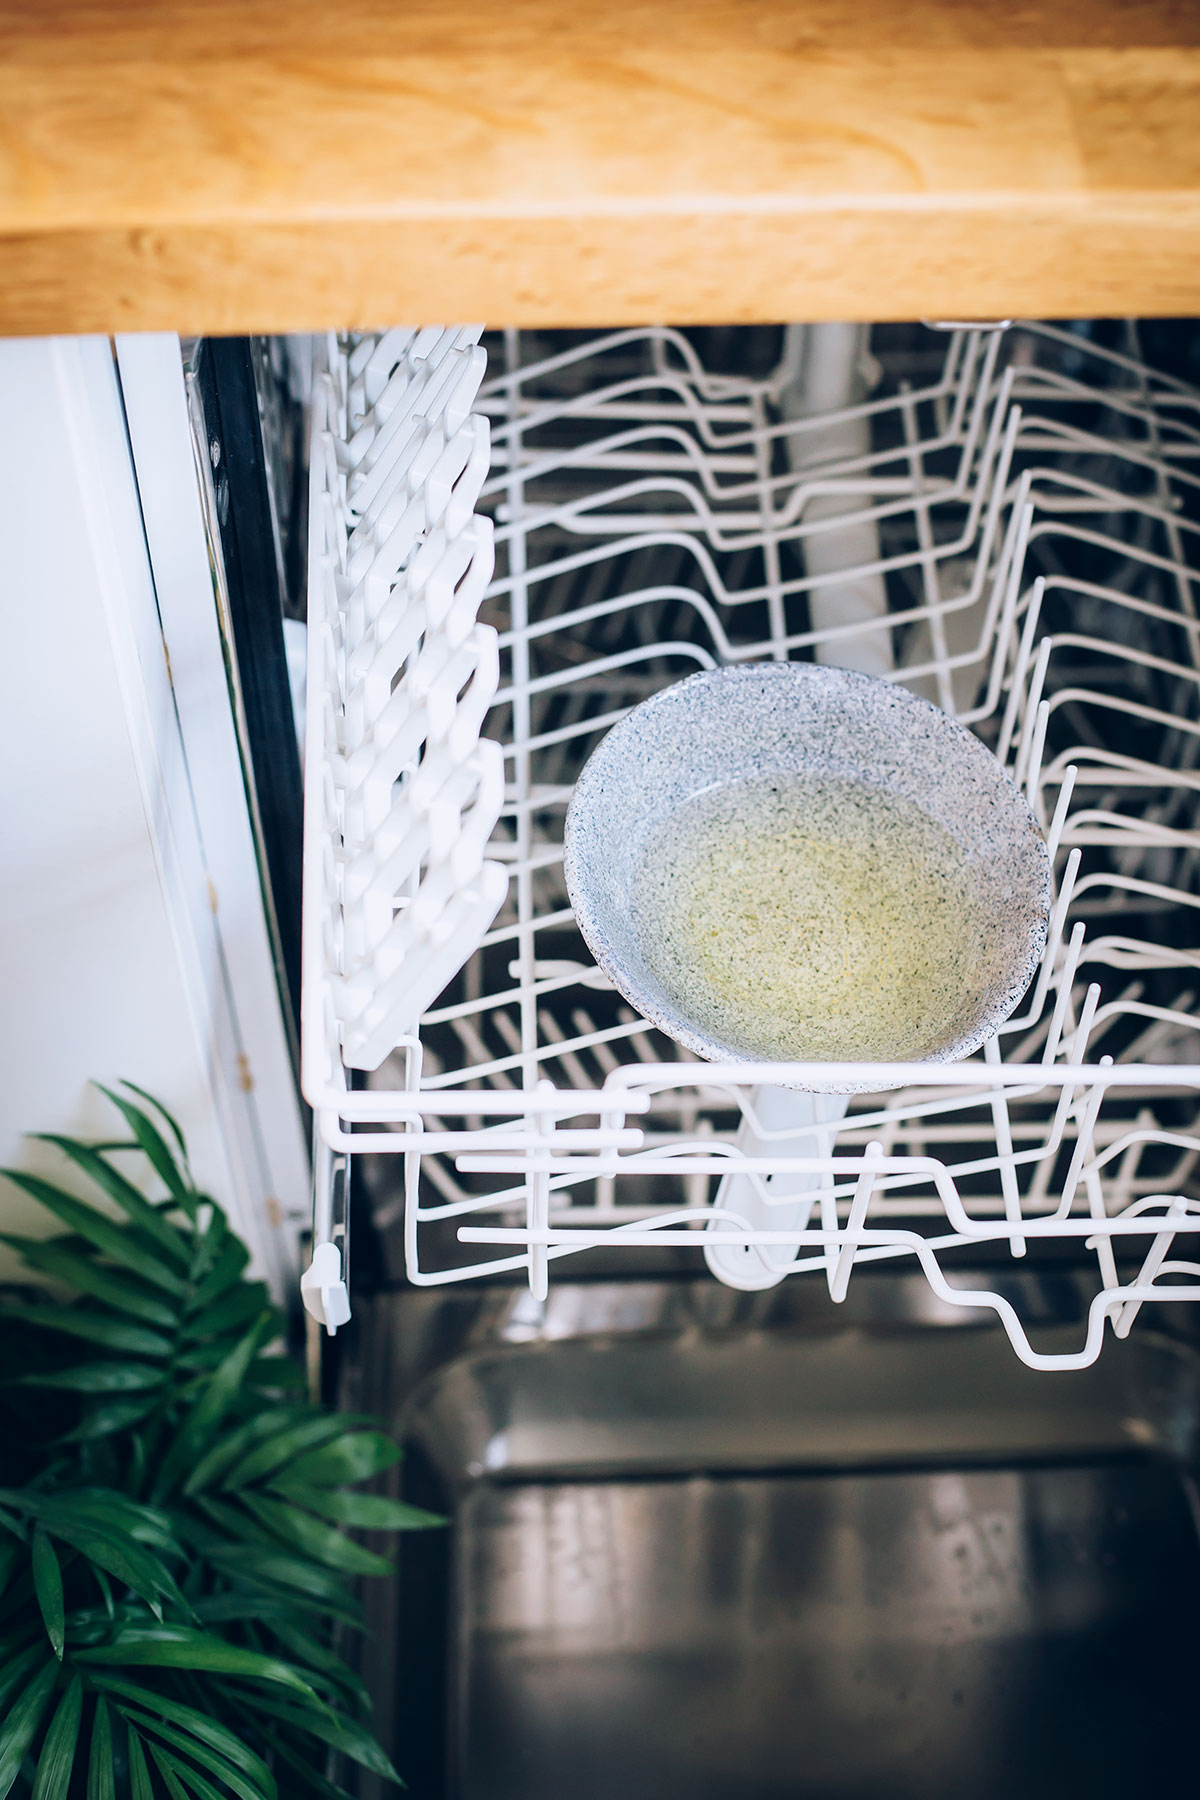 How To Clean The Dishwasher With Vinegar + Baking Soda  Hello Nest